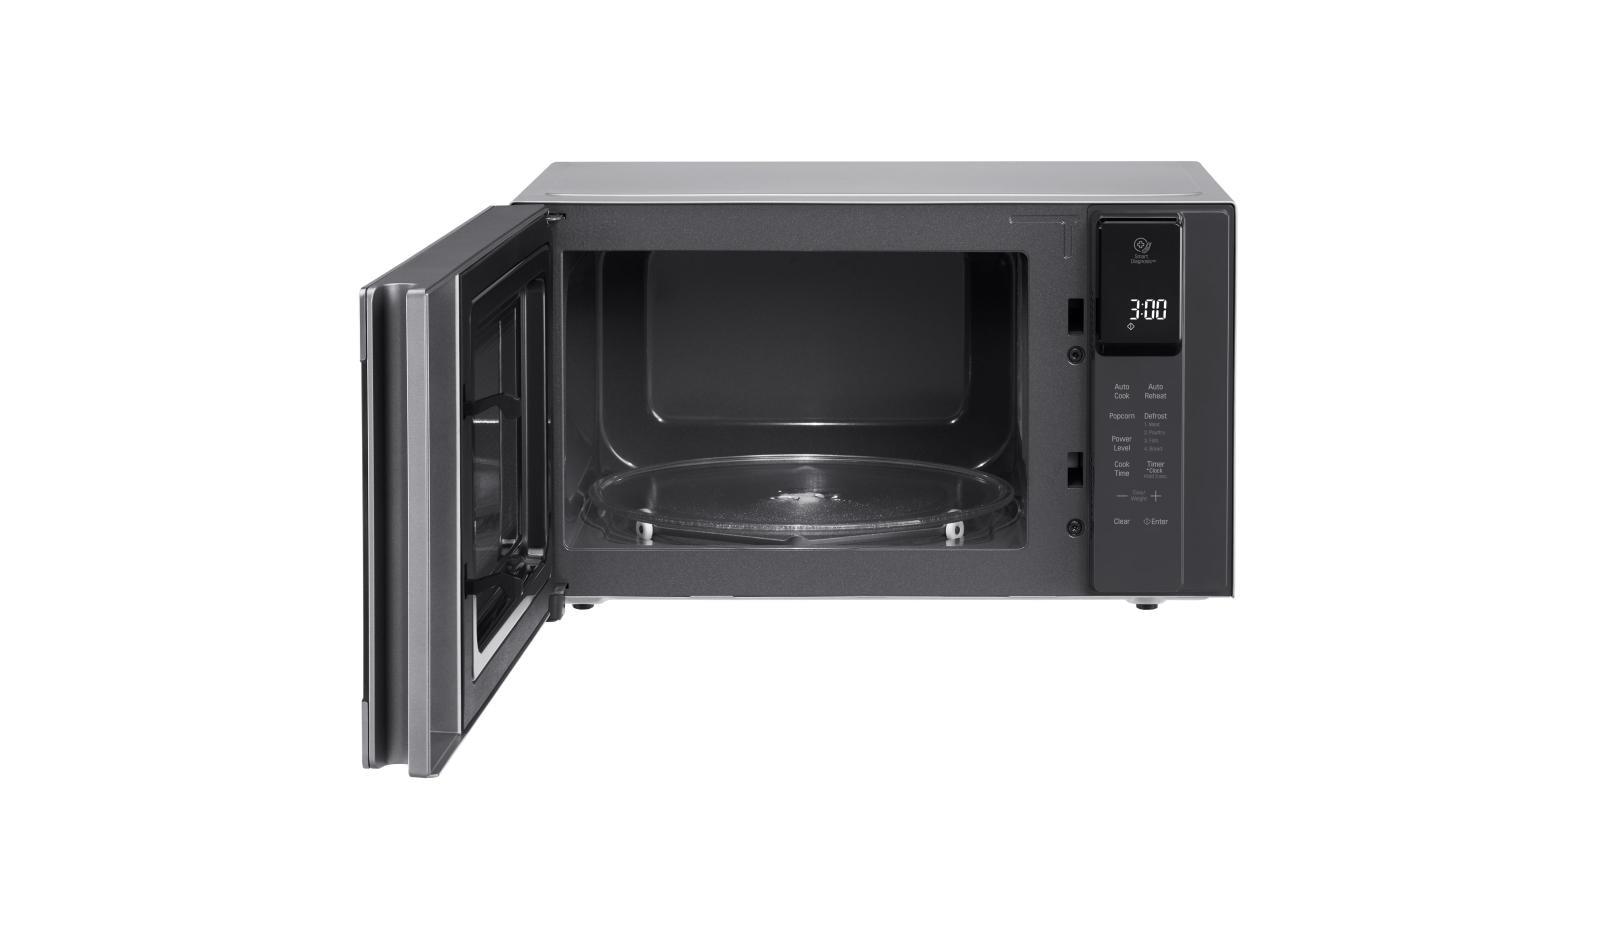 0.9 cu. ft. NeoChef™ Countertop Microwave with Smart Inverter and EasyClean®